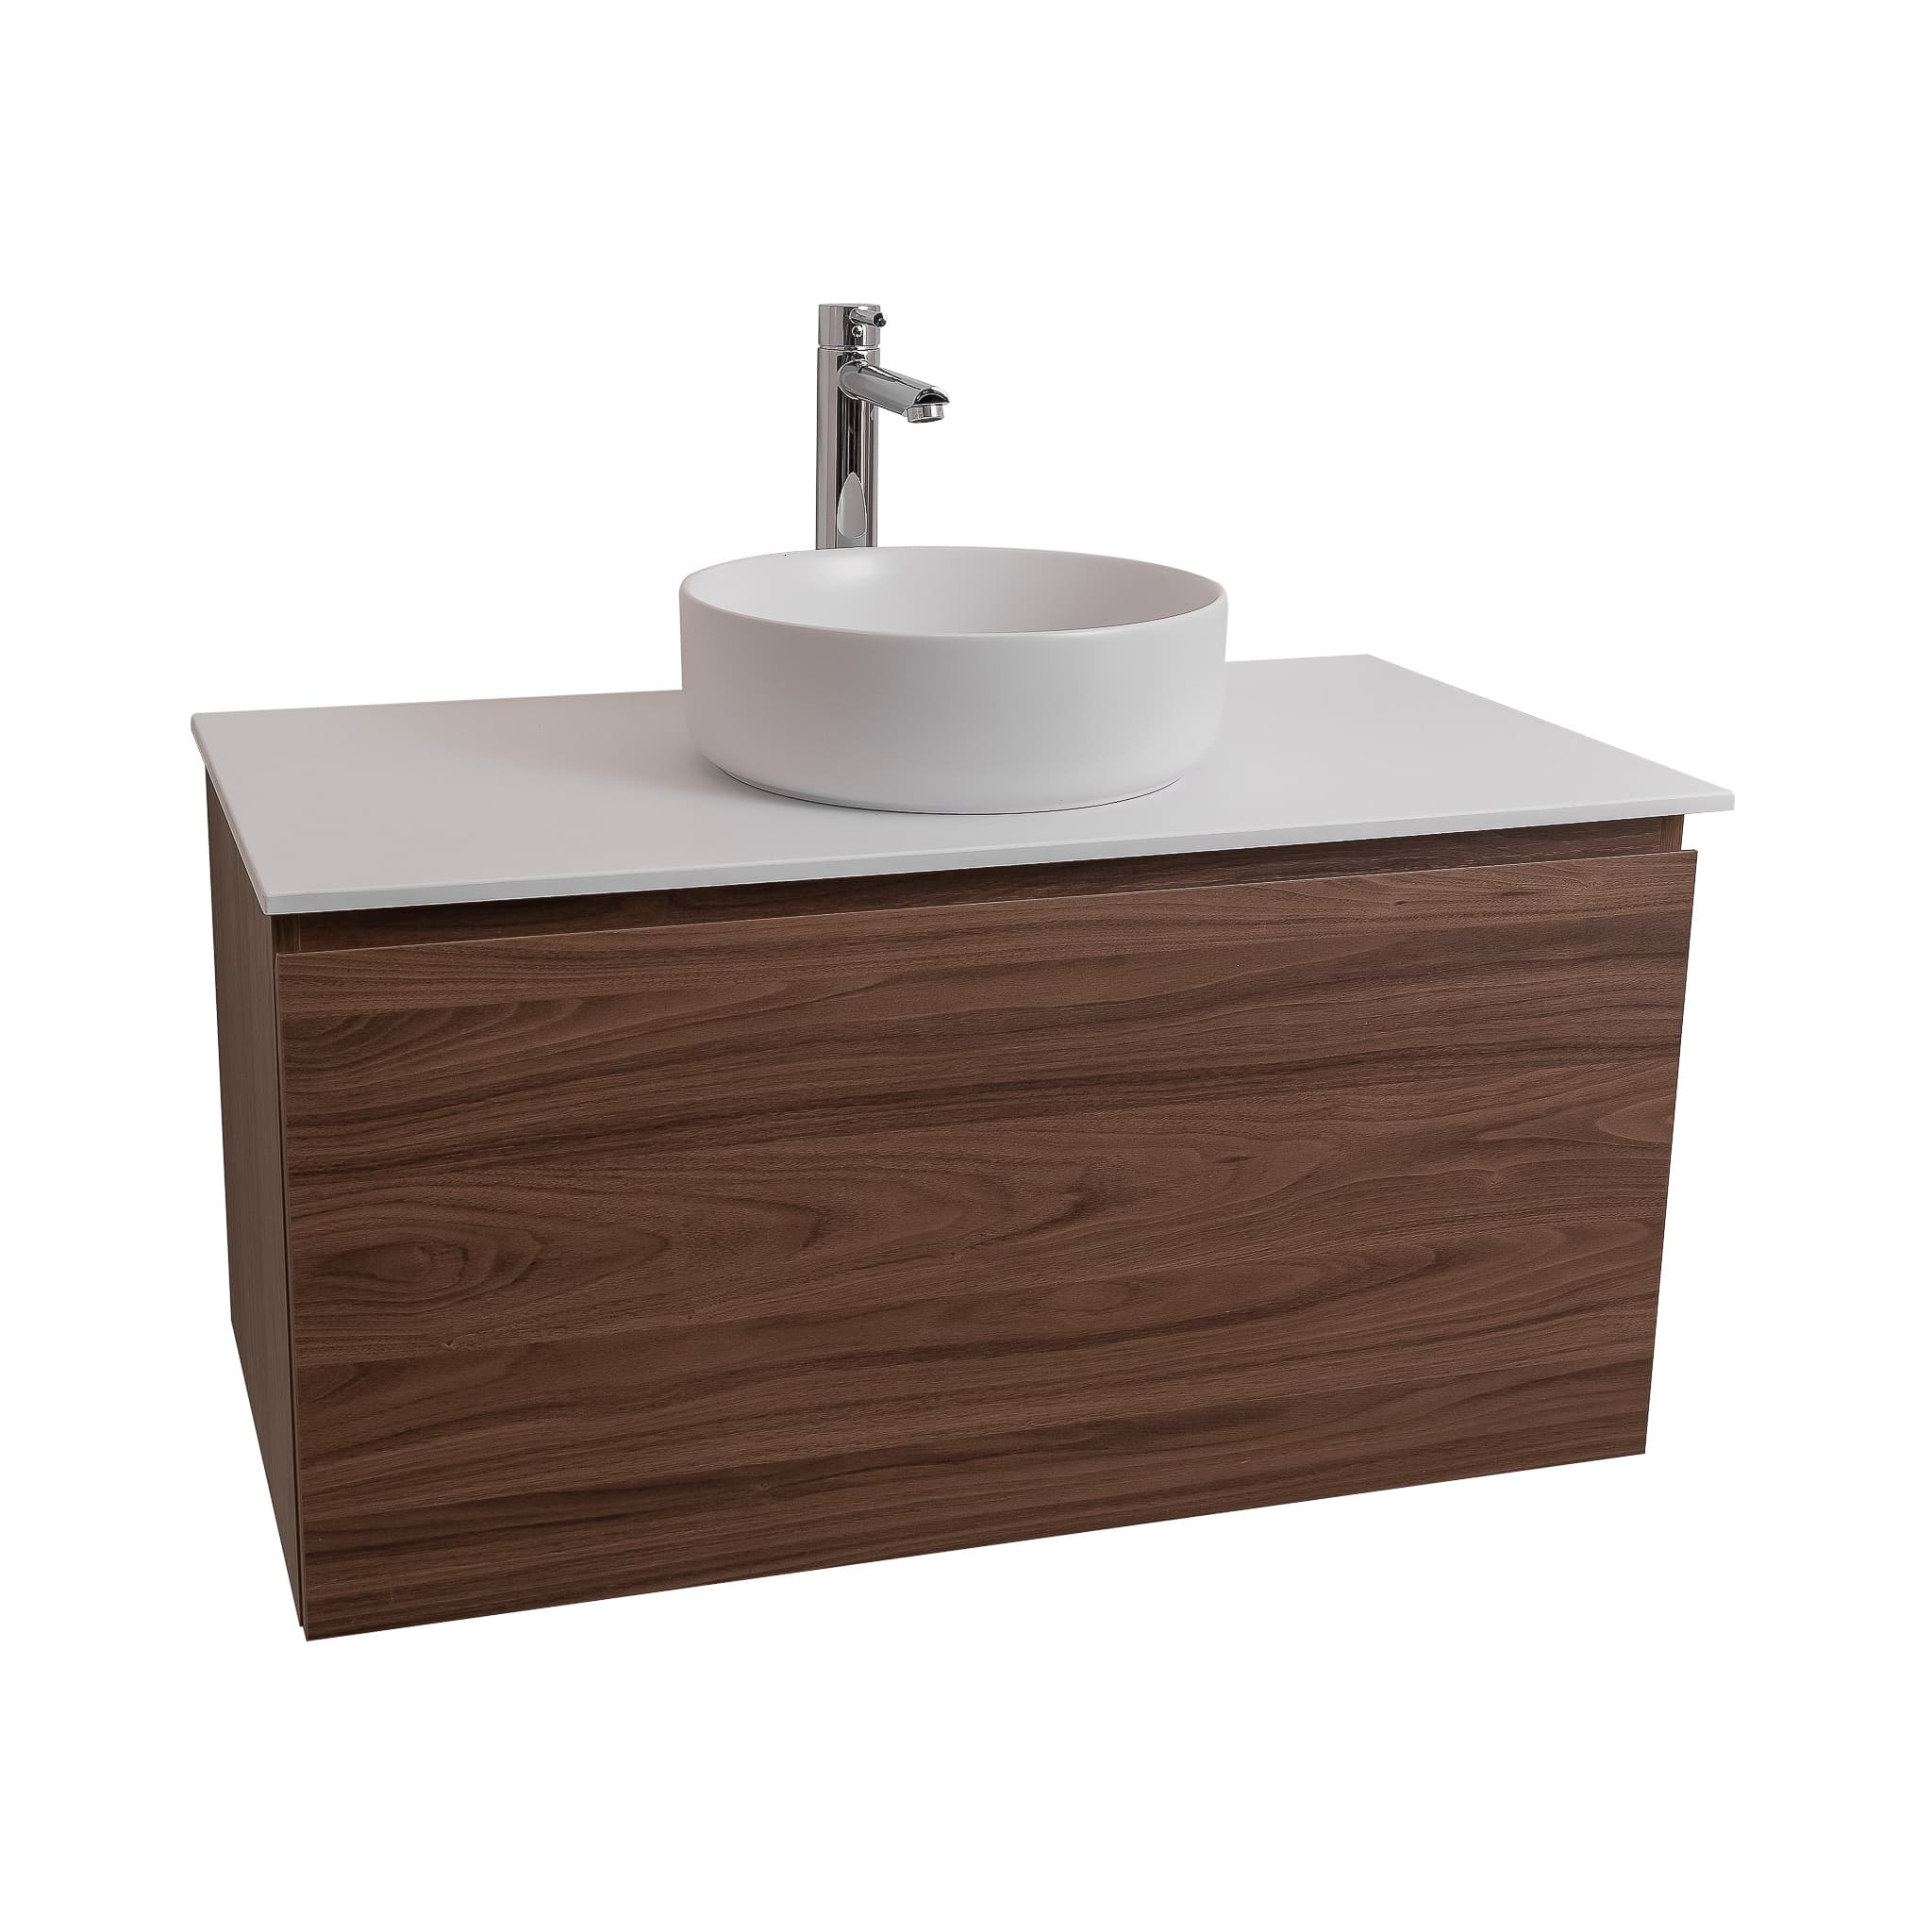 Venice 31.5 Walnut Wood Texture Cabinet, Ares White Top And Ares White Ceramic Basin, Wall Mounted Modern Vanity Set